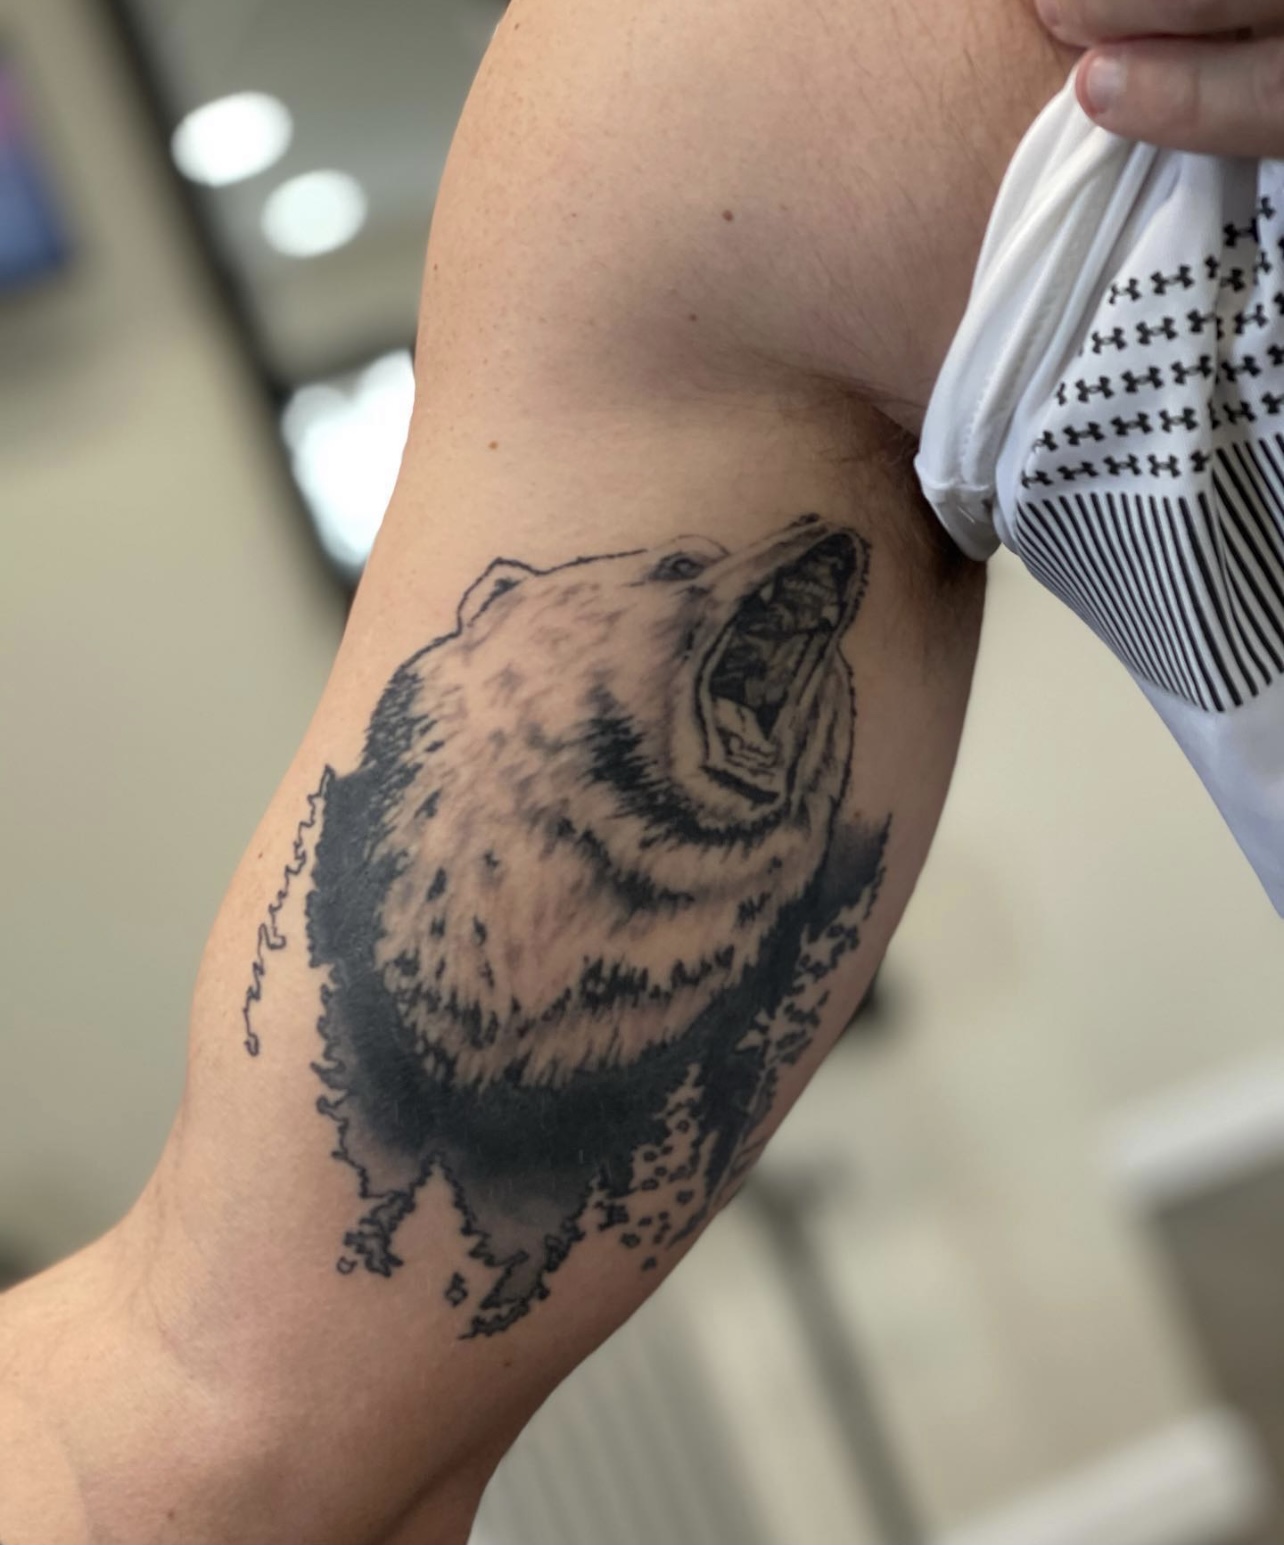 A bear tattoo on the arm of someone.